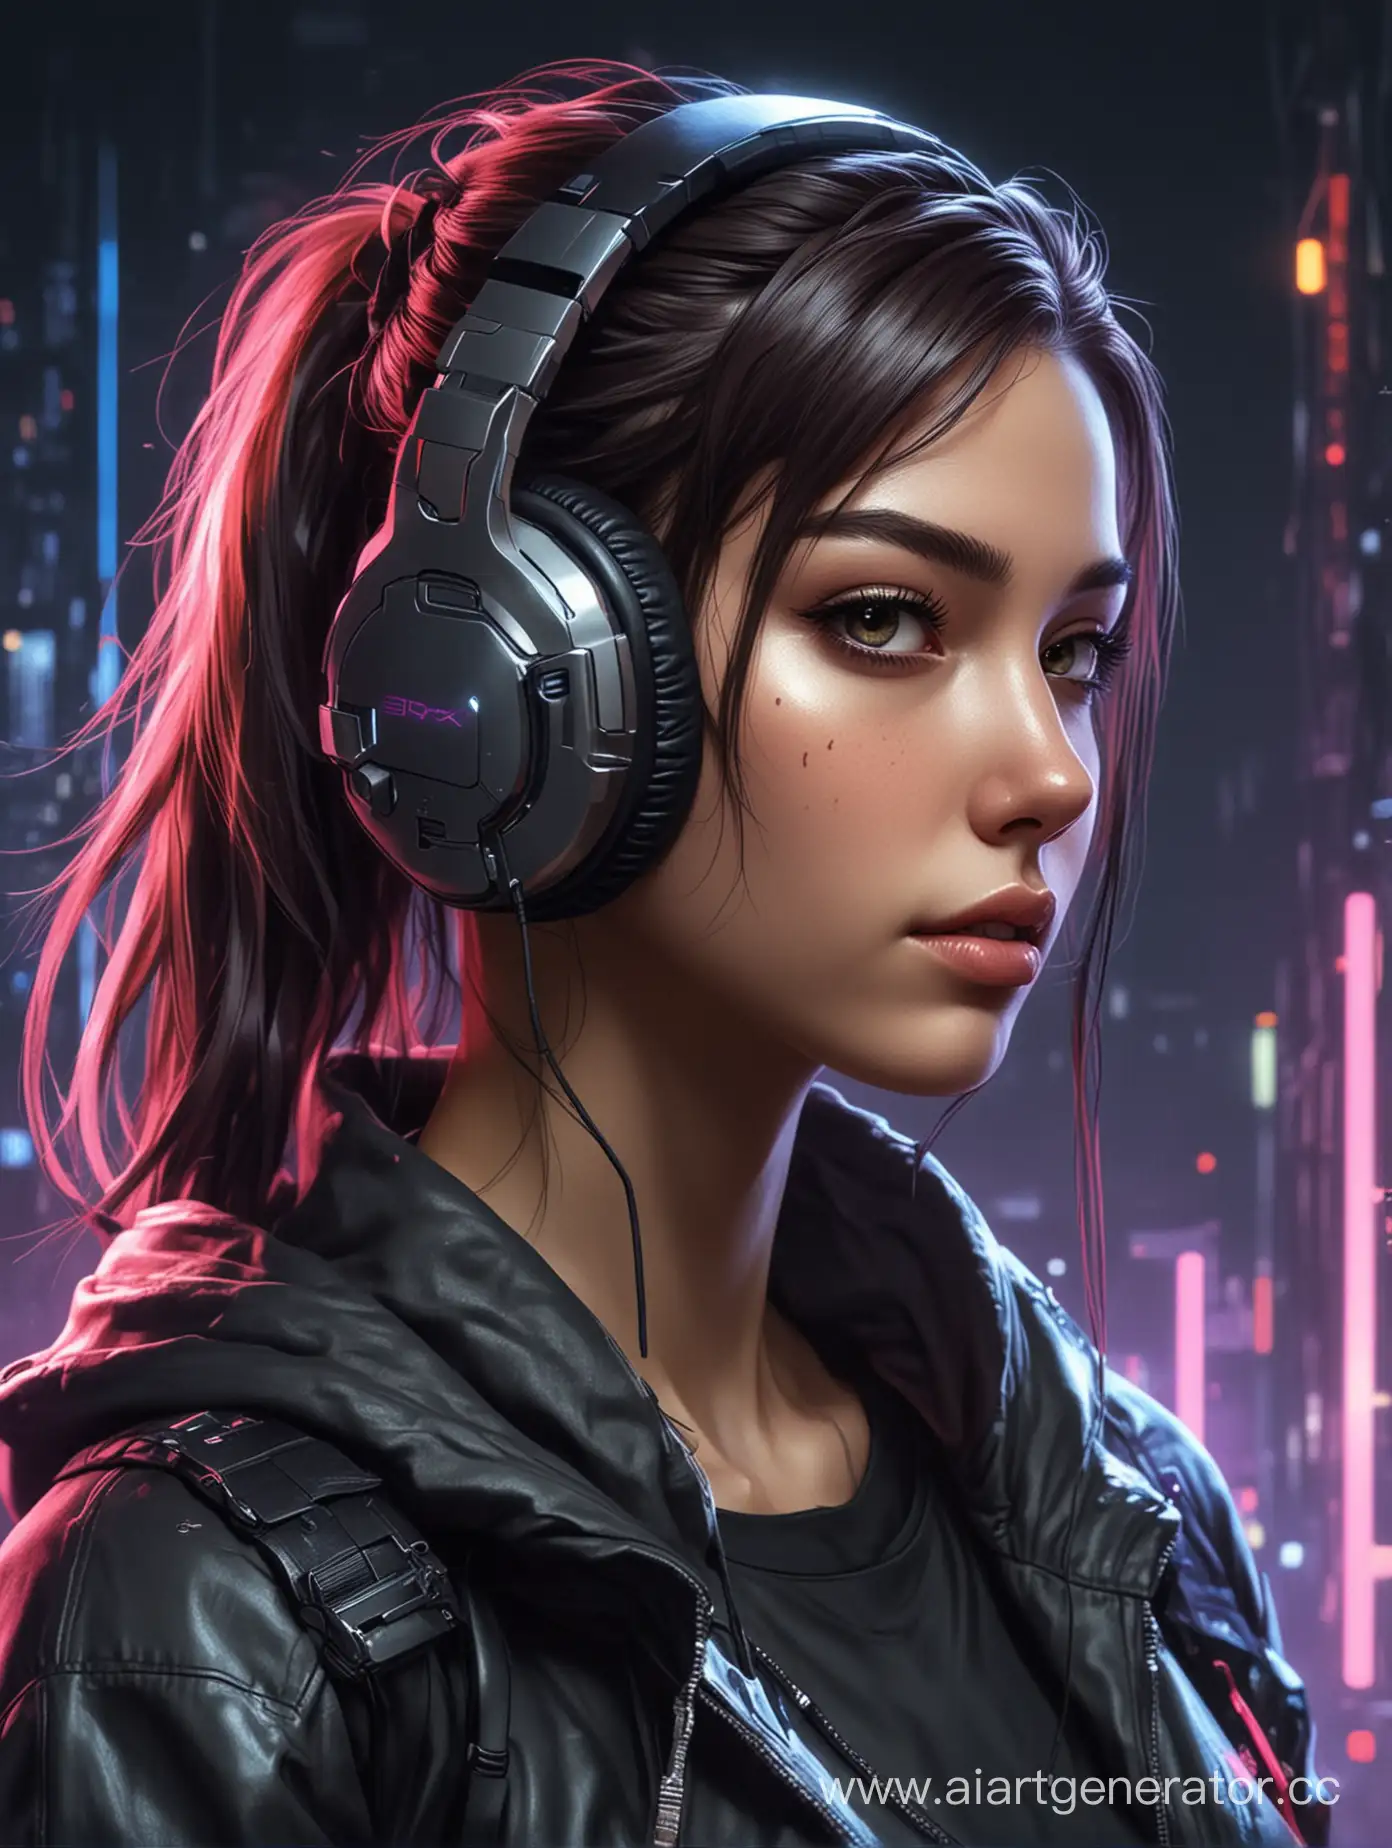 a girl with headphones, the image style is cyberpunk.